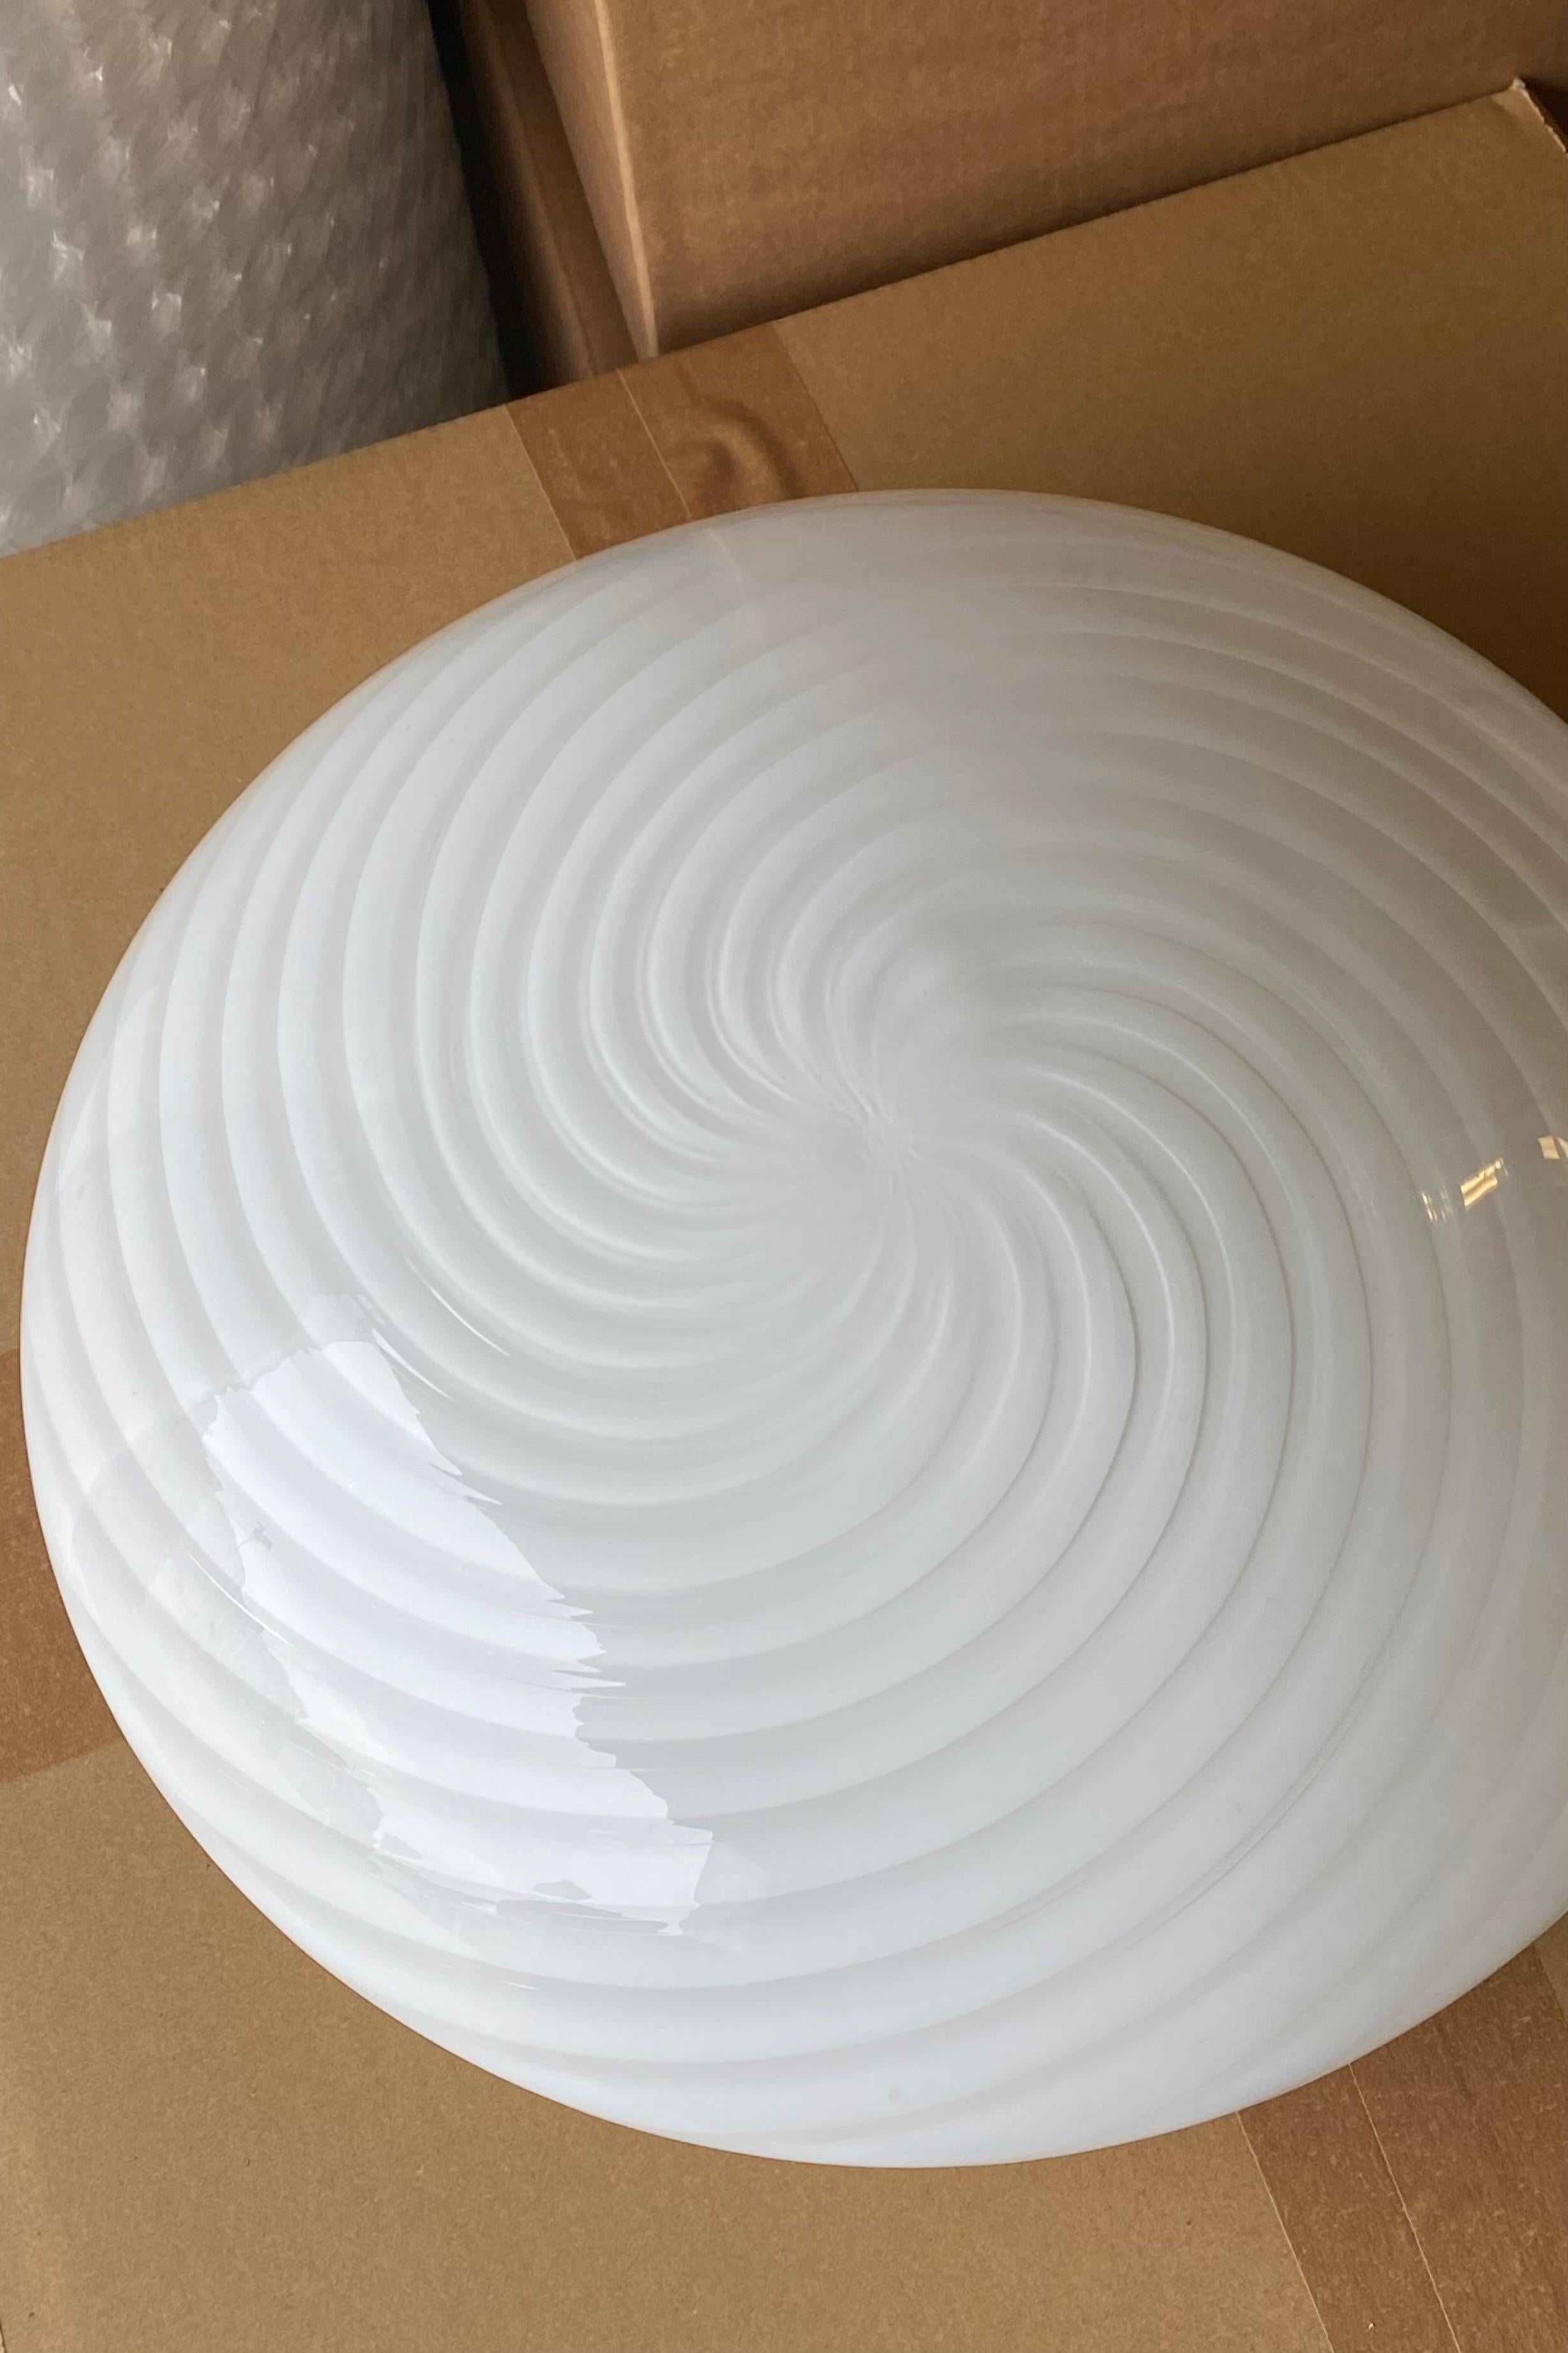 Vintage Murano plafond ceiling lamp / wall lamp. Mouth-blown white opaline glass with swirl and white base. E27 socket. Handmade in Italy, 1970s.
D:42 cm⁠⁠ H:17 cm
